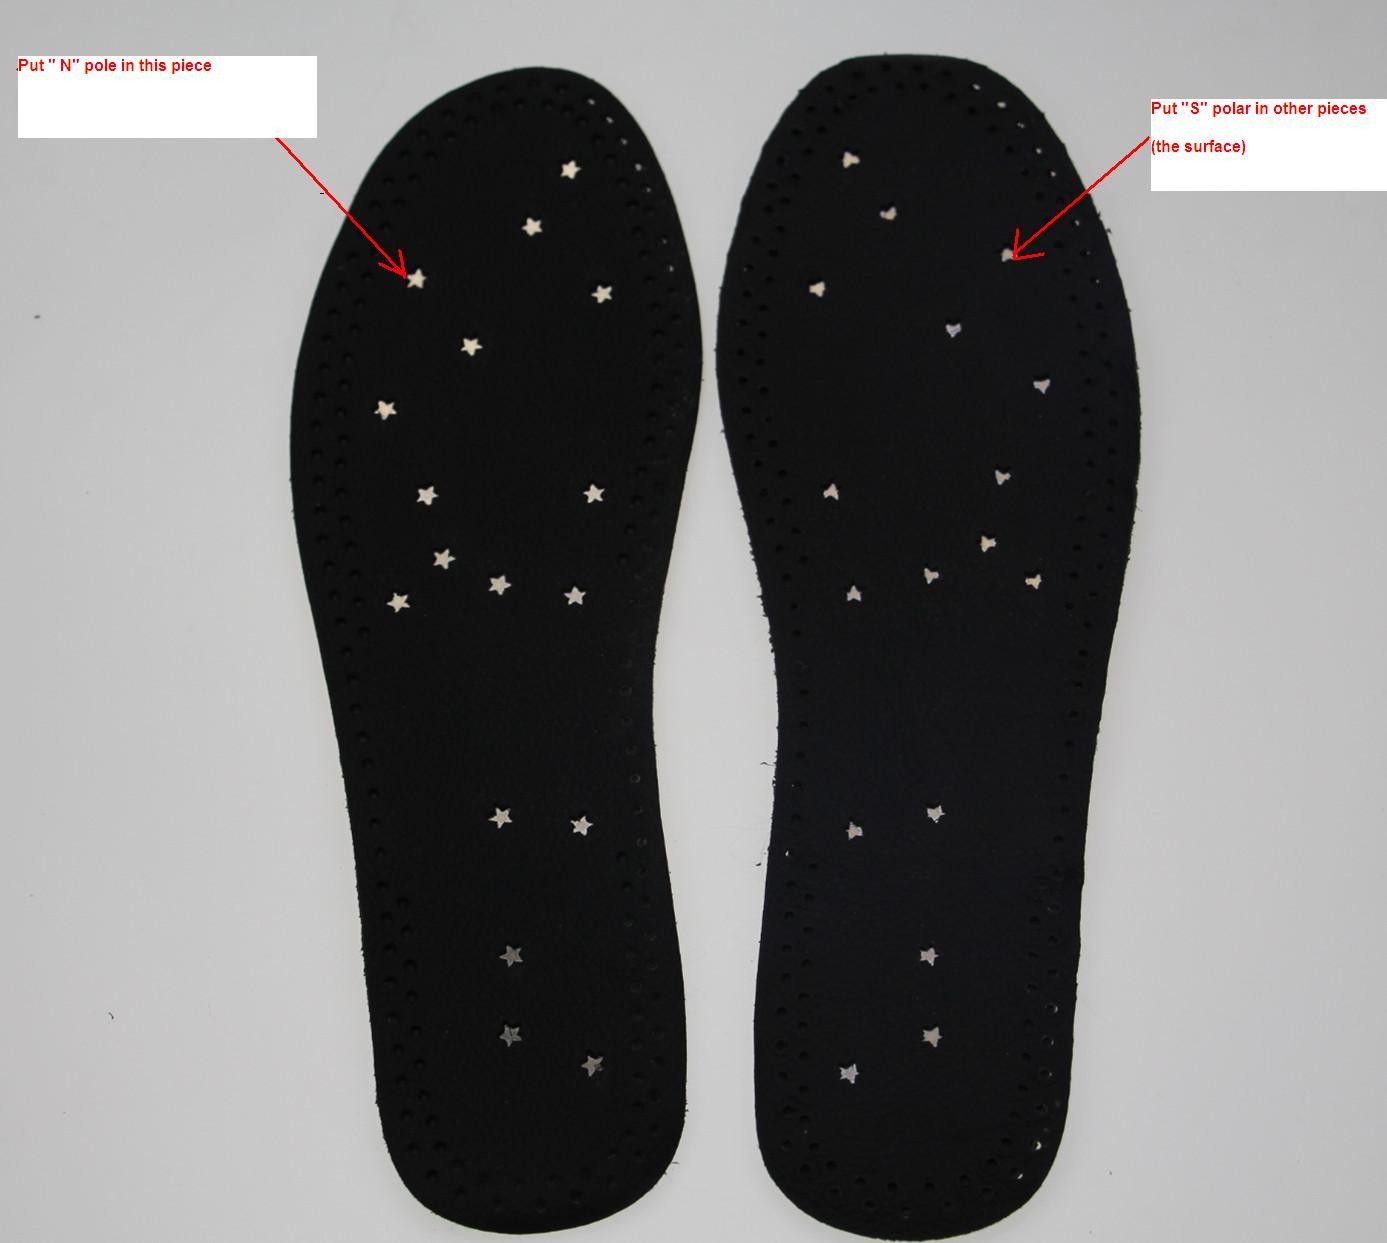 Foot Massage Magnetic Health Gel Insoles